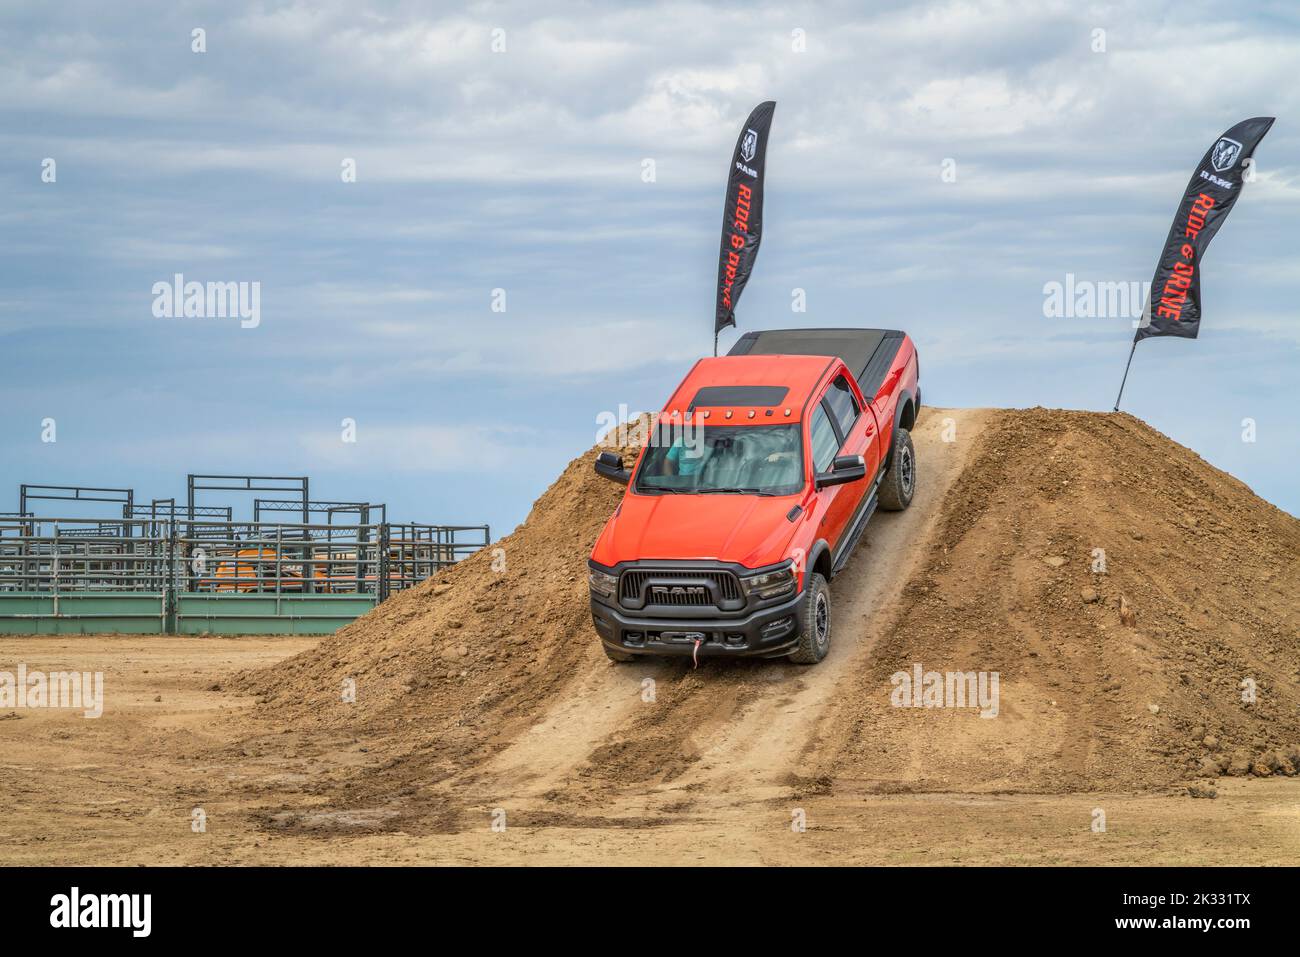 Loveland, CO, USA - August 26, 2022: Dodge RAM Power Wagon truck on a training drive off-road course. Stock Photo